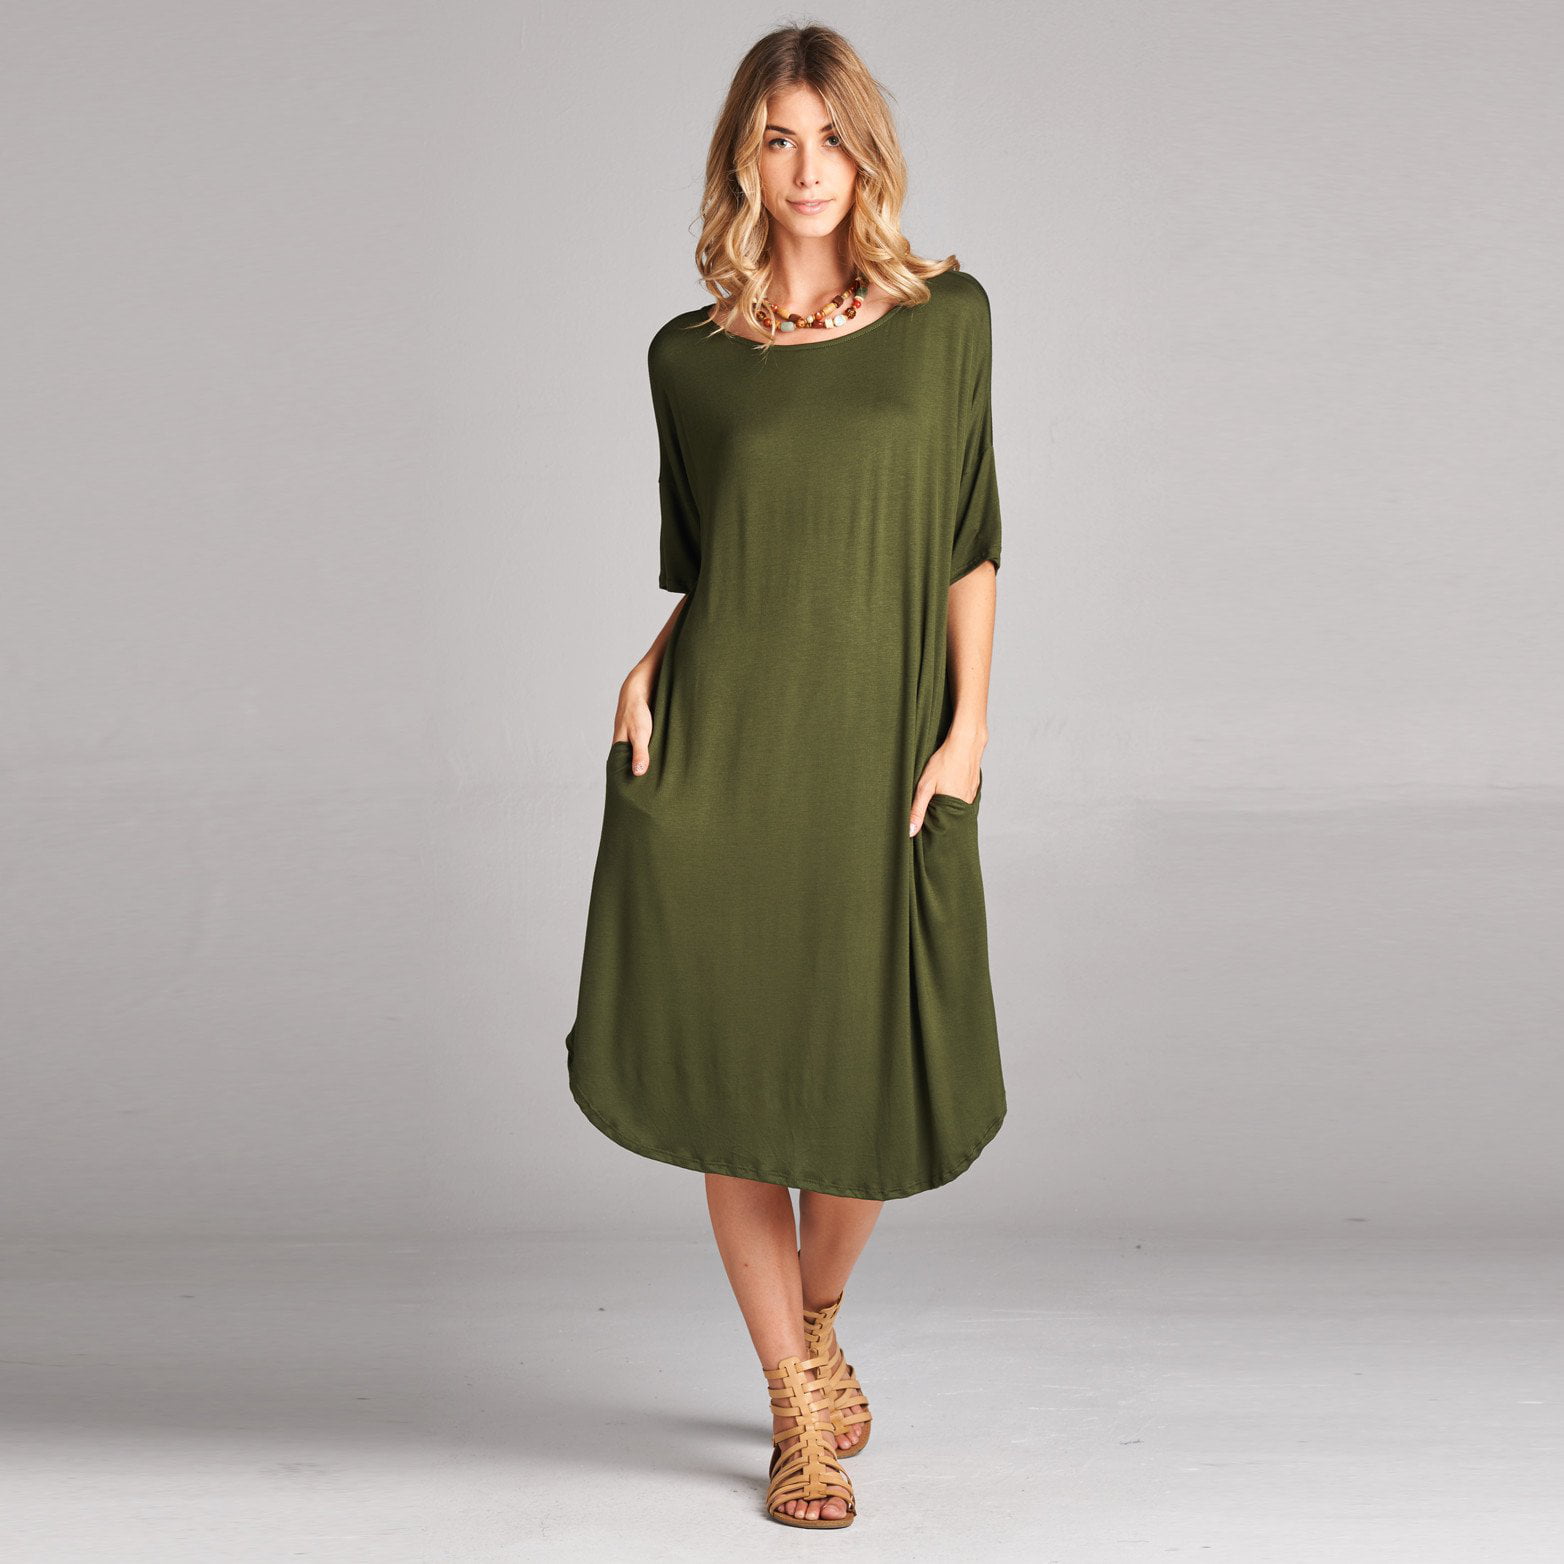 Relaxed Fit Dress with Pockets - Walmart.com